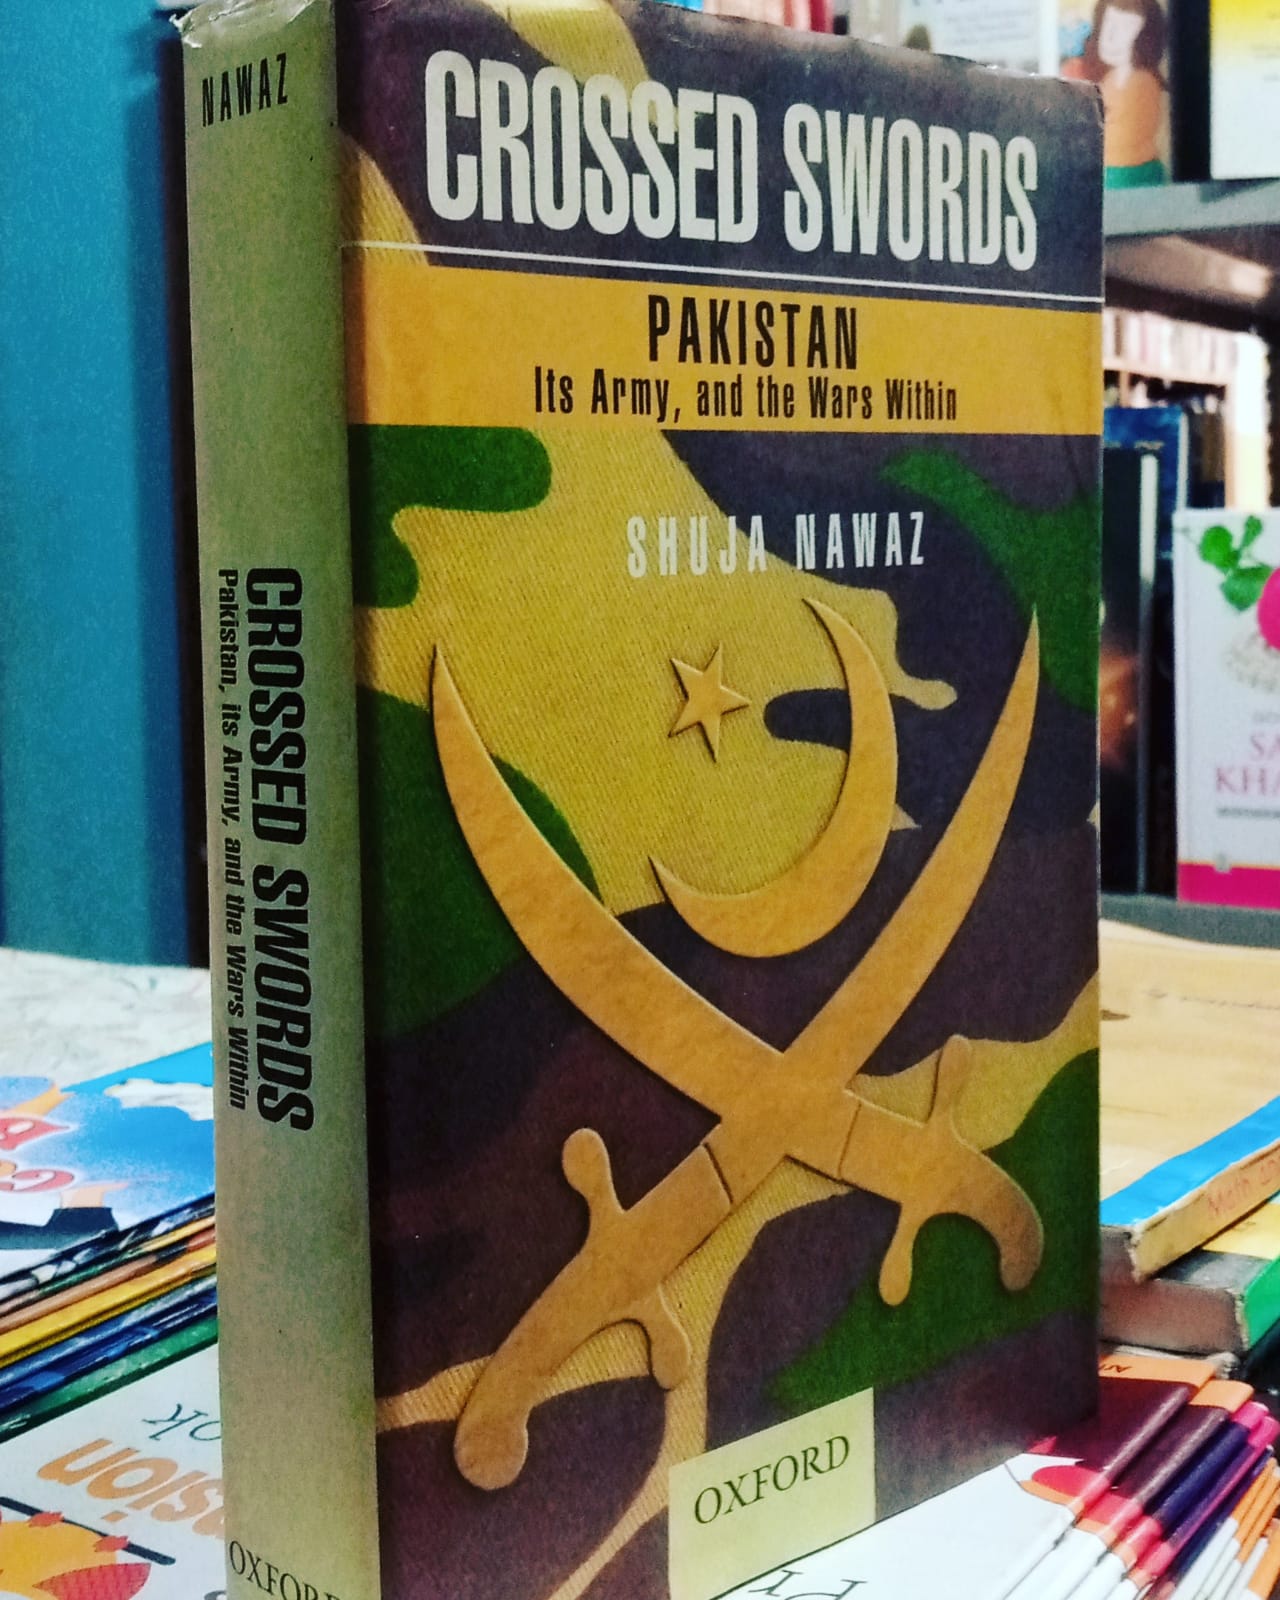 crossed swords pakistan, its army and the wars within by shuja nawaz. 1st edition original hardcover